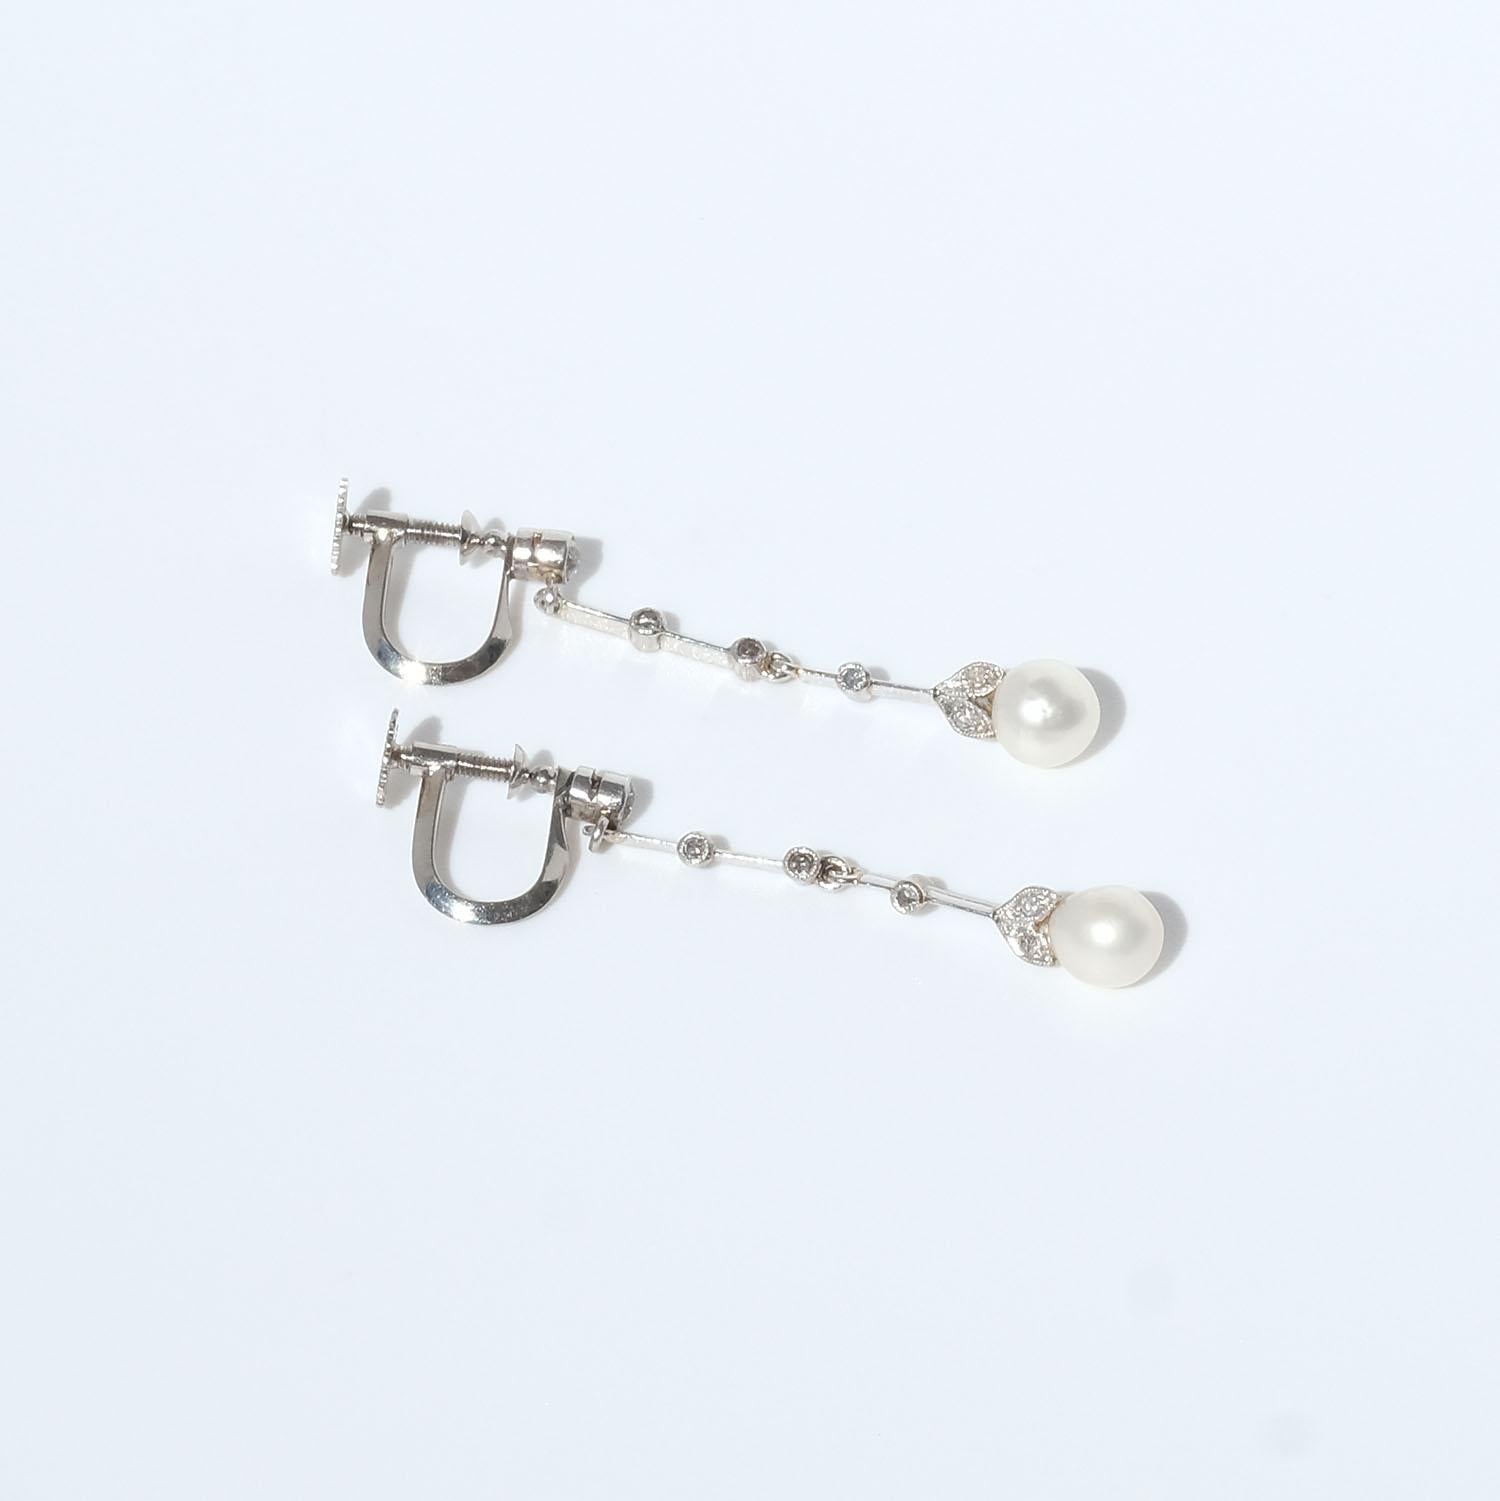 Octagon Cut Swedish 18k White Gold, Diamond and Pearl Earrings, Mid-20th Century For Sale